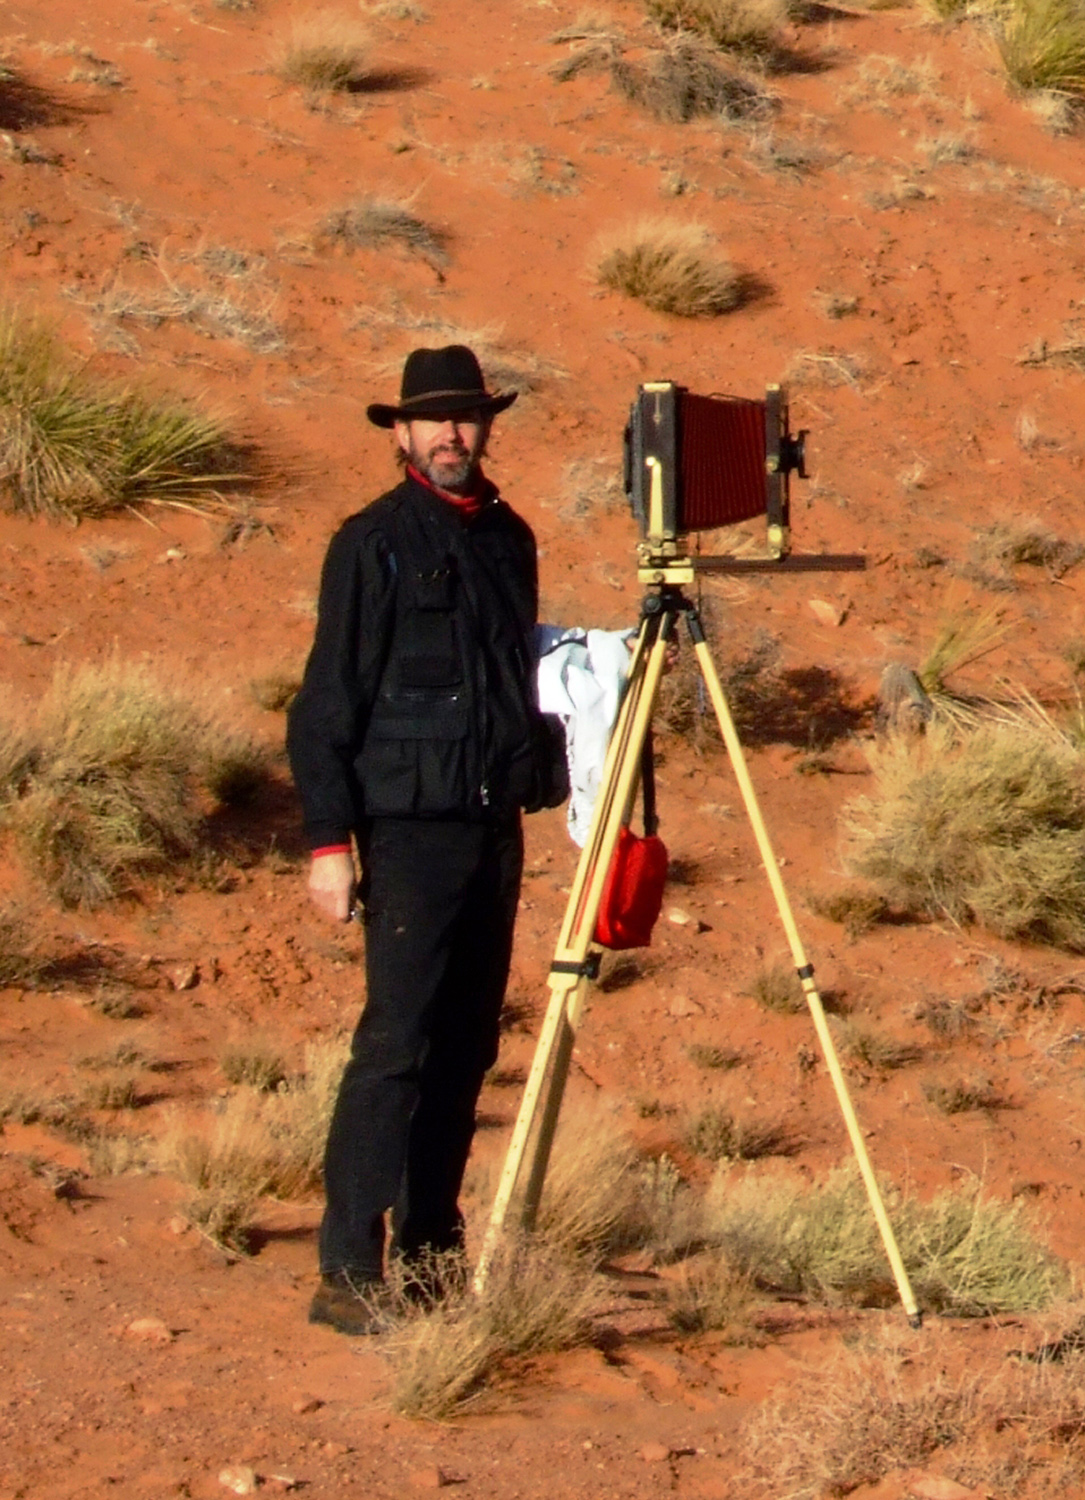 Michael on location in Monument Valley, 2006. Photo by Theresa Roberts.